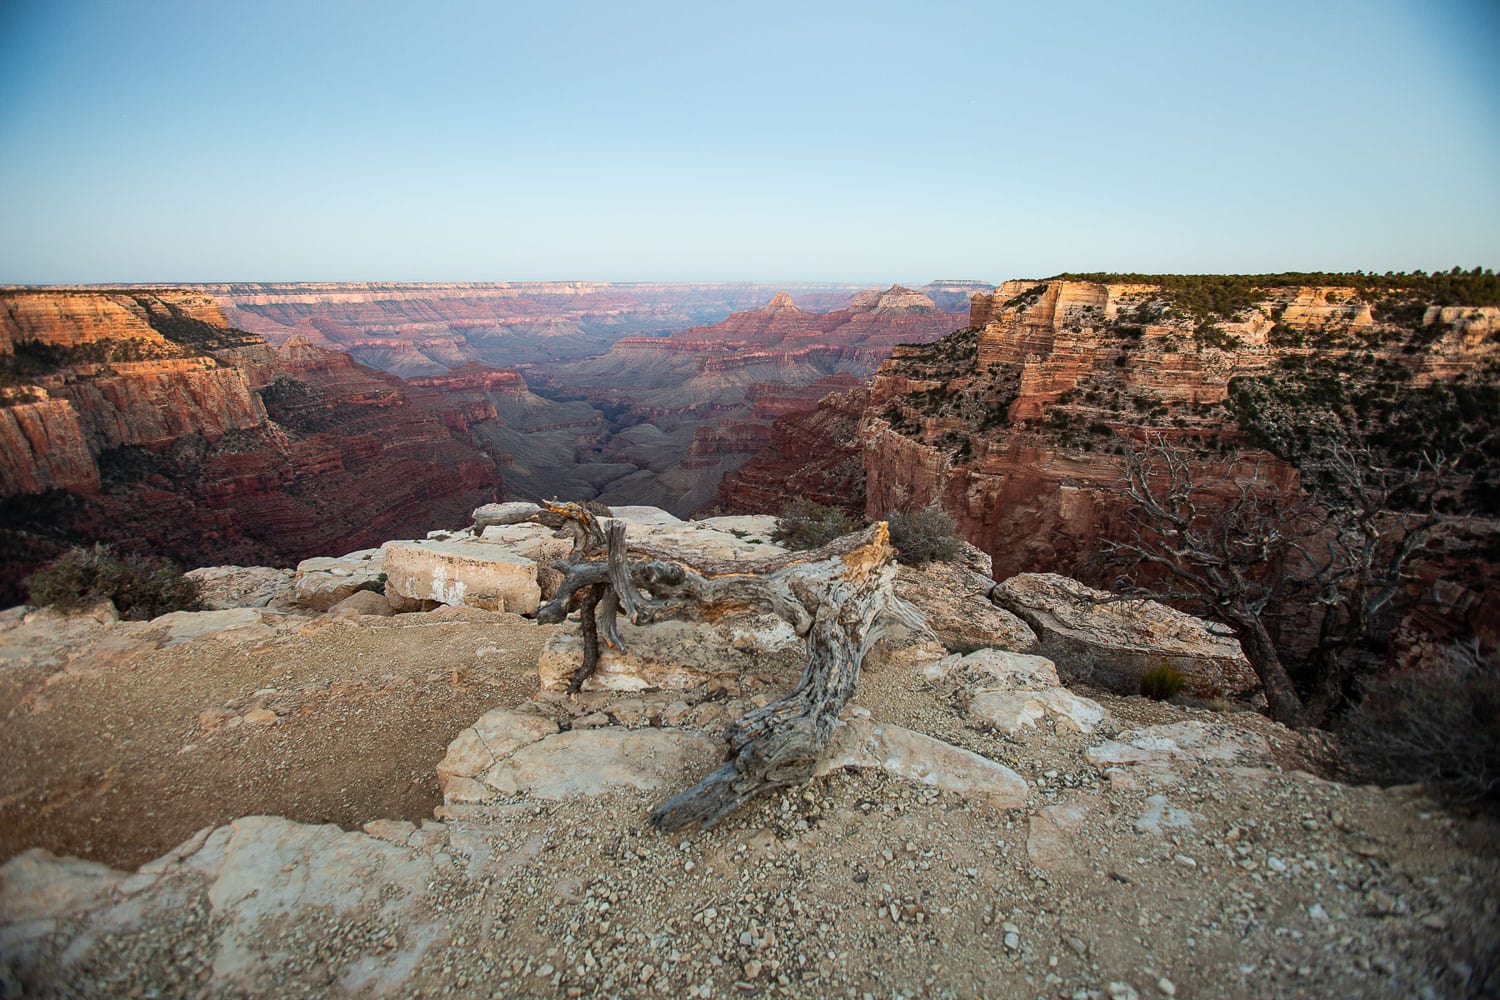 The dry landscape of the Grand canyon.